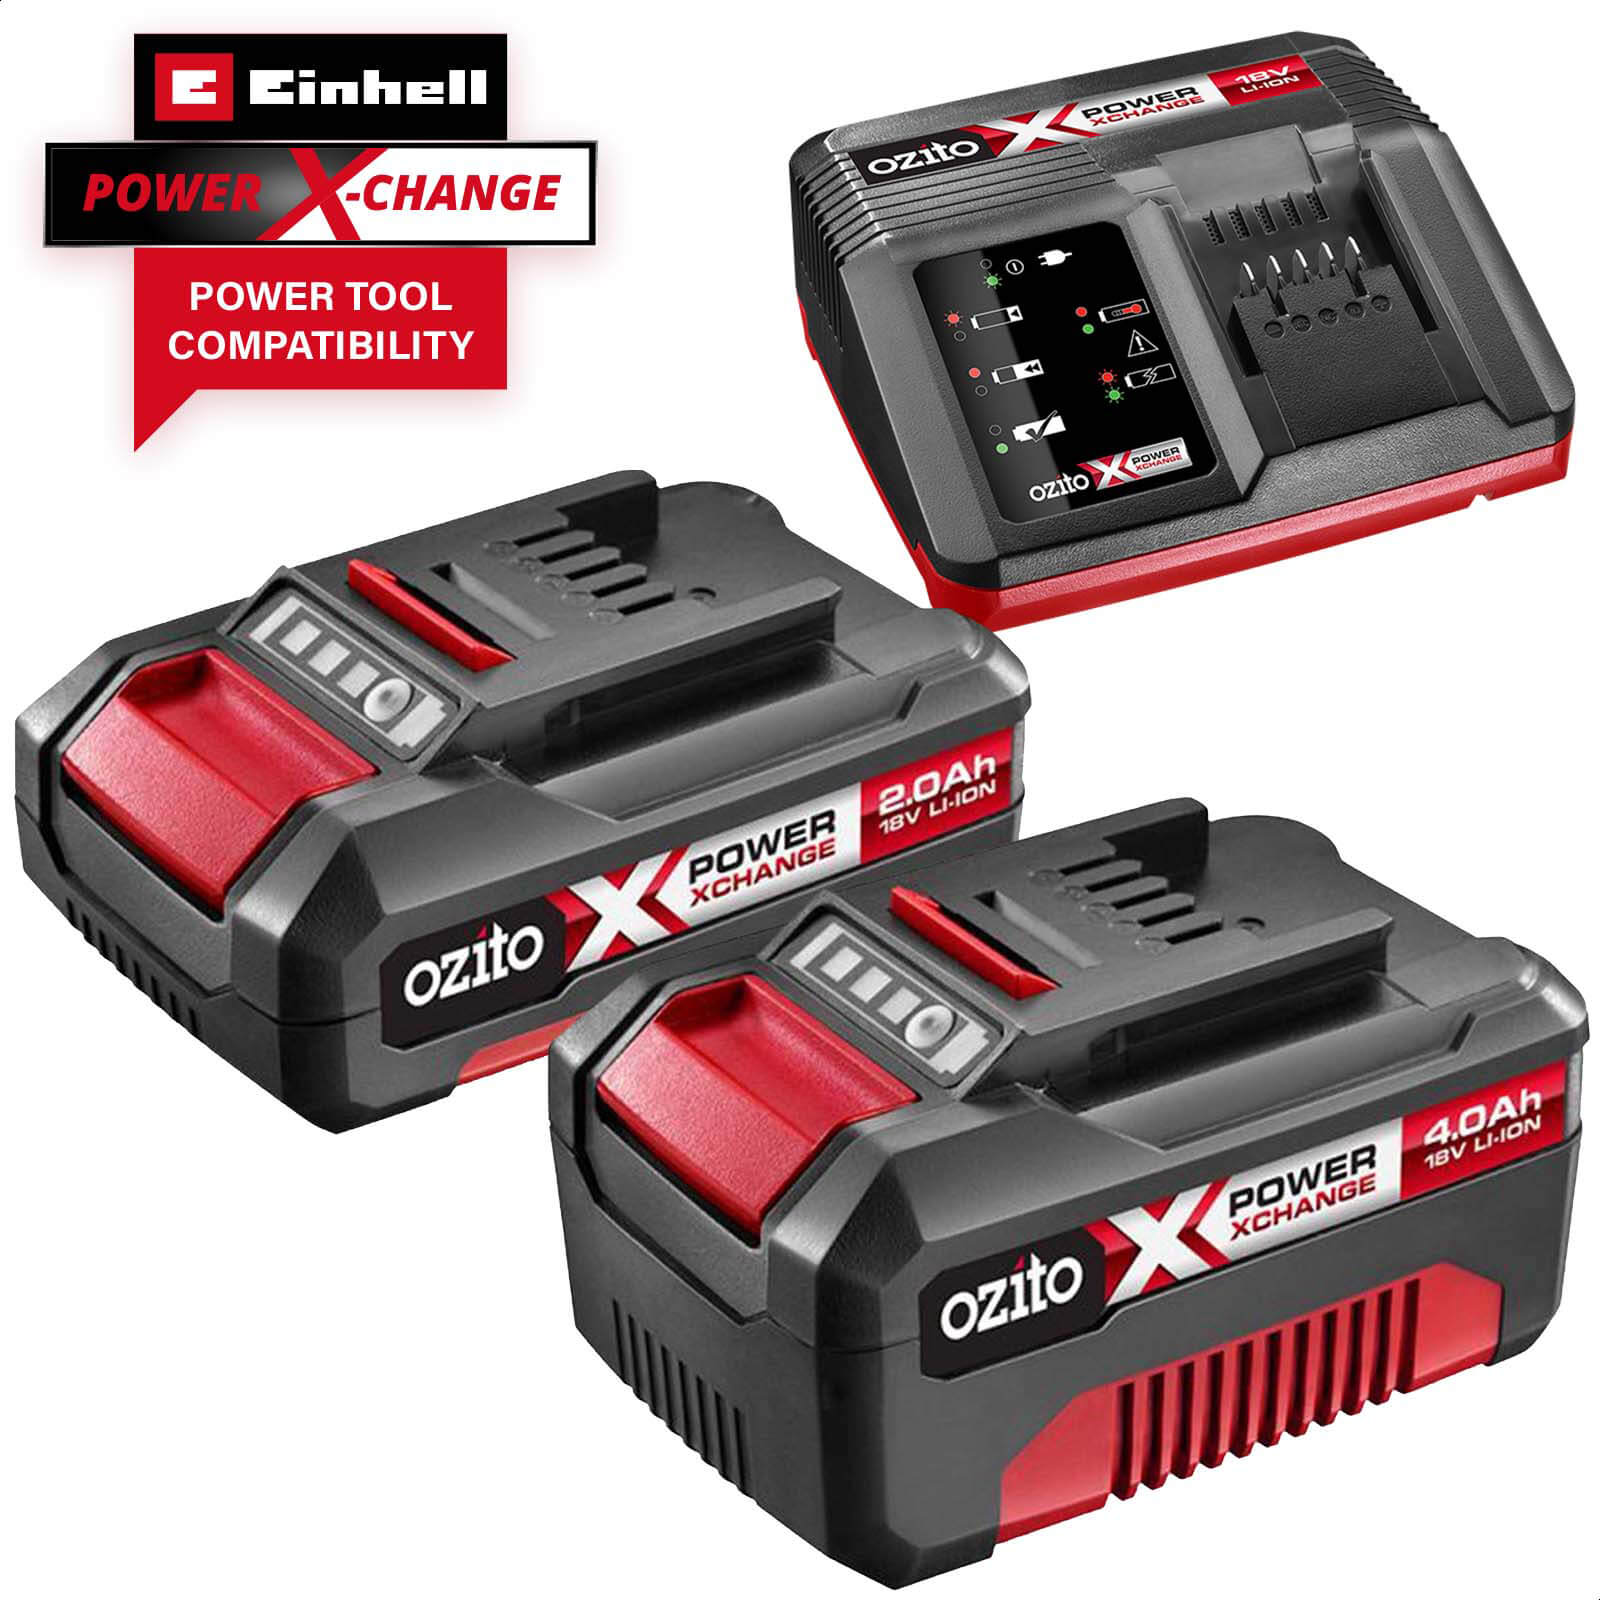 Image of Ozito Genuine 18v Cordless Power X-Change Fast Battery Charger, Li-ion Battery 2ah and Battery 4ah 2ah & 4ah